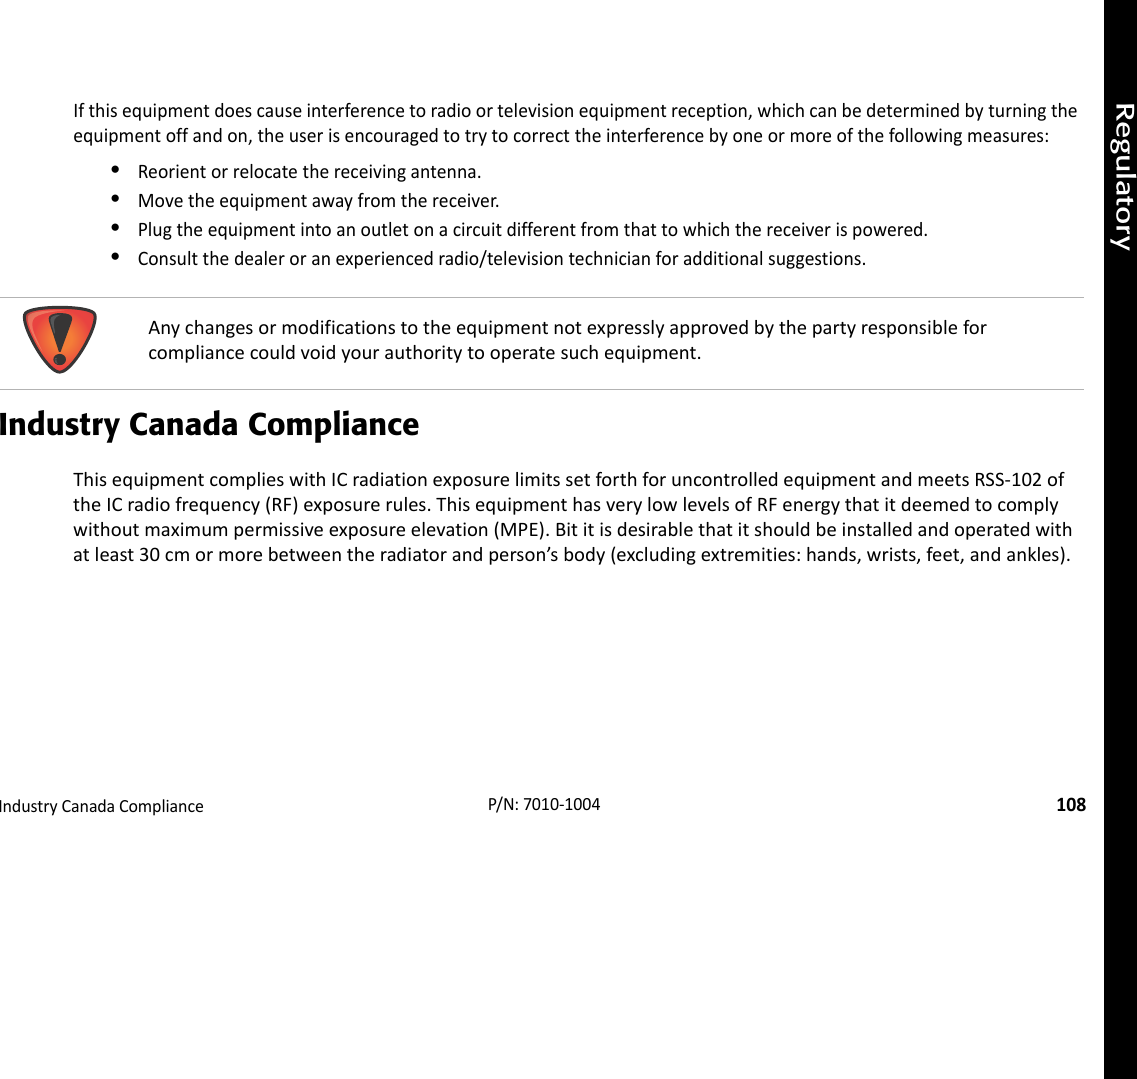 RegulatoryIndustryCanadaCompliance108P/N:7010‐1004Ifthisequipmentdoescauseinterferencetoradioortelevisionequipmentreception,whichcanbedeterminedbyturningtheequipmentoffandon,theuserisencouragedtotrytocorrecttheinterferencebyoneormoreofthefollowingmeasures:•Reorientorrelocatethereceivingantenna.•Movetheequipmentawayfromthereceiver.•Plugtheequipmentintoanoutletonacircuitdifferentfromthattowhichthereceiverispowered.•Consultthedealeroranexperiencedradio/televisiontechnicianforadditionalsuggestions.Industry Canada ComplianceThisequipmentcomplieswithICradiationexposurelimitssetforthforuncontrolledequipmentandmeetsRSS‐102oftheICradiofrequency(RF)exposurerules.ThisequipmenthasverylowlevelsofRFenergythatitdeemedtocomplywithoutmaximumpermissiveexposureelevation(MPE).Bititisdesirablethatitshouldbeinstalledandoperatedwithatleast30cmormorebetweentheradiatorandperson’sbody(excludingextremities:hands,wrists,feet,andankles).Anychangesormodificationstotheequipmentnotexpresslyapprovedbythepartyresponsibleforcompliancecouldvoidyourauthoritytooperatesuchequipment.